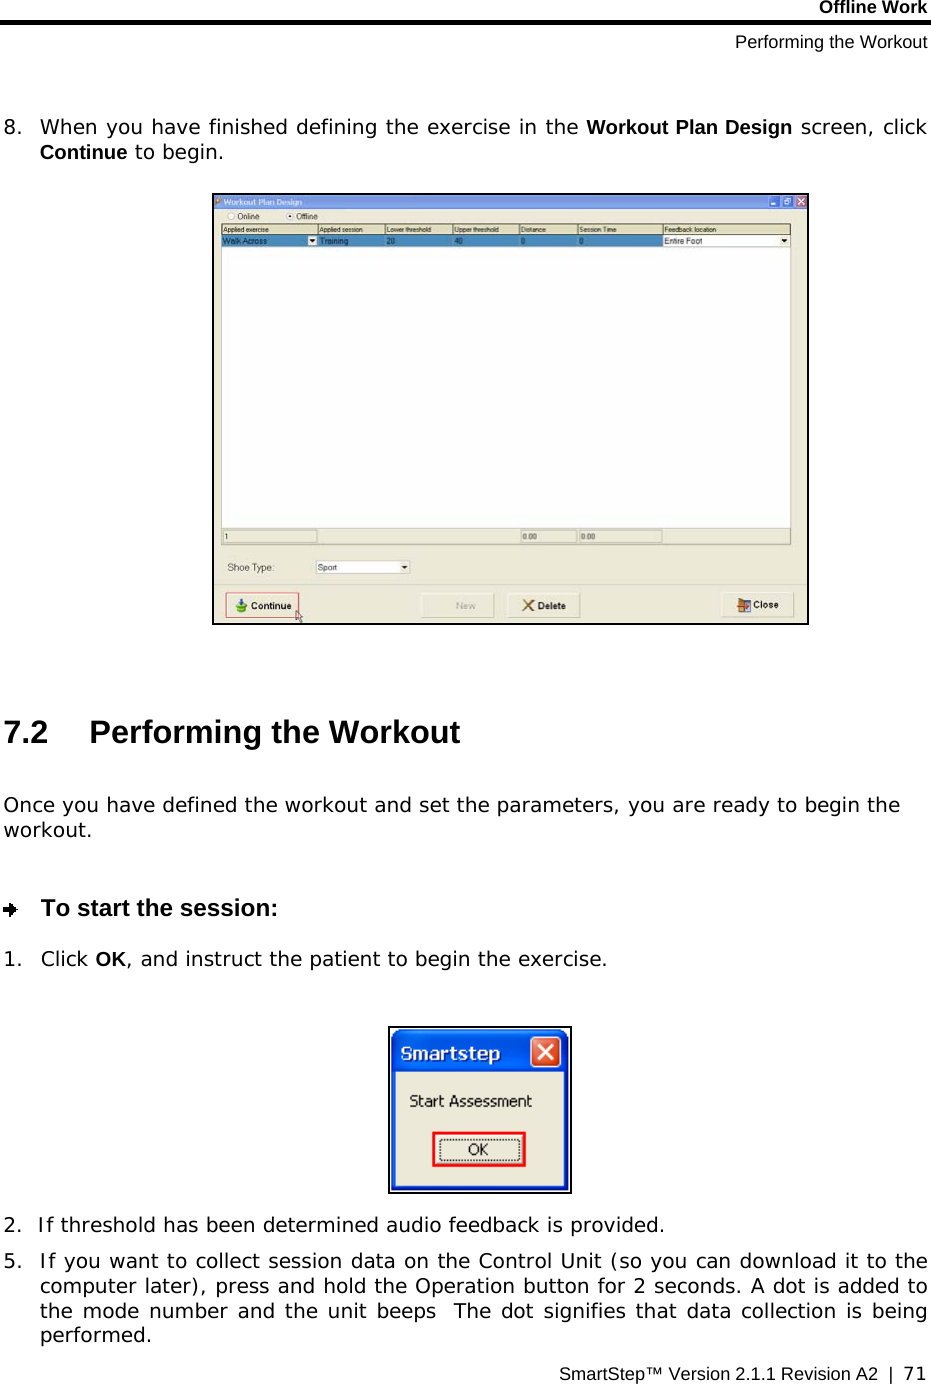 Offline Work Performing the Workout SmartStep™ Version 2.1.1 Revision A2  |  71   8. When you have finished defining the exercise in the Workout Plan Design screen, click Continue to begin.     7.2 Performing the Workout  Once you have defined the workout and set the parameters, you are ready to begin the workout.     To start the session: 1. Click OK, and instruct the patient to begin the exercise.   2.  If threshold has been determined audio feedback is provided. 5. If you want to collect session data on the Control Unit (so you can download it to the computer later), press and hold the Operation button for 2 seconds. A dot is added to the mode number and the unit beeps  The dot signifies that data collection is being performed. 